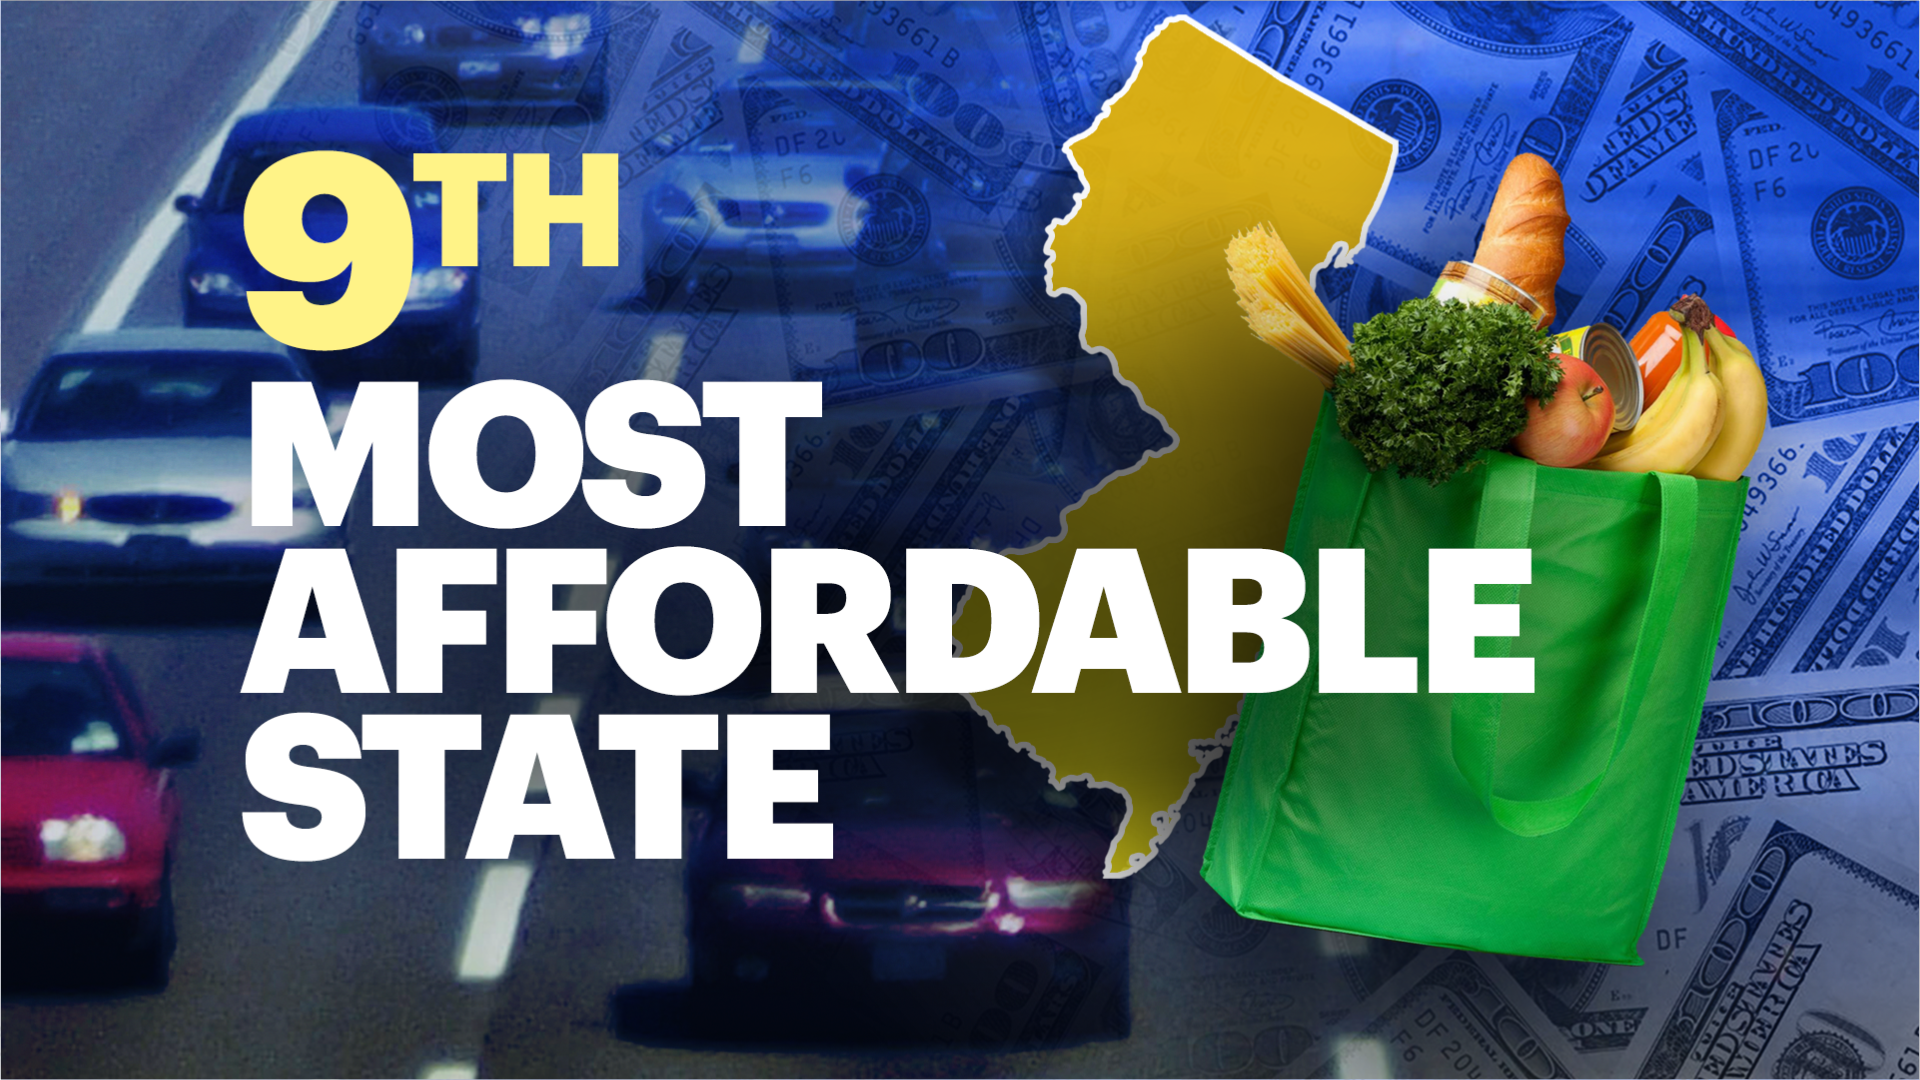 Study: New Jersey ranks as the 9th most affordable state to live in